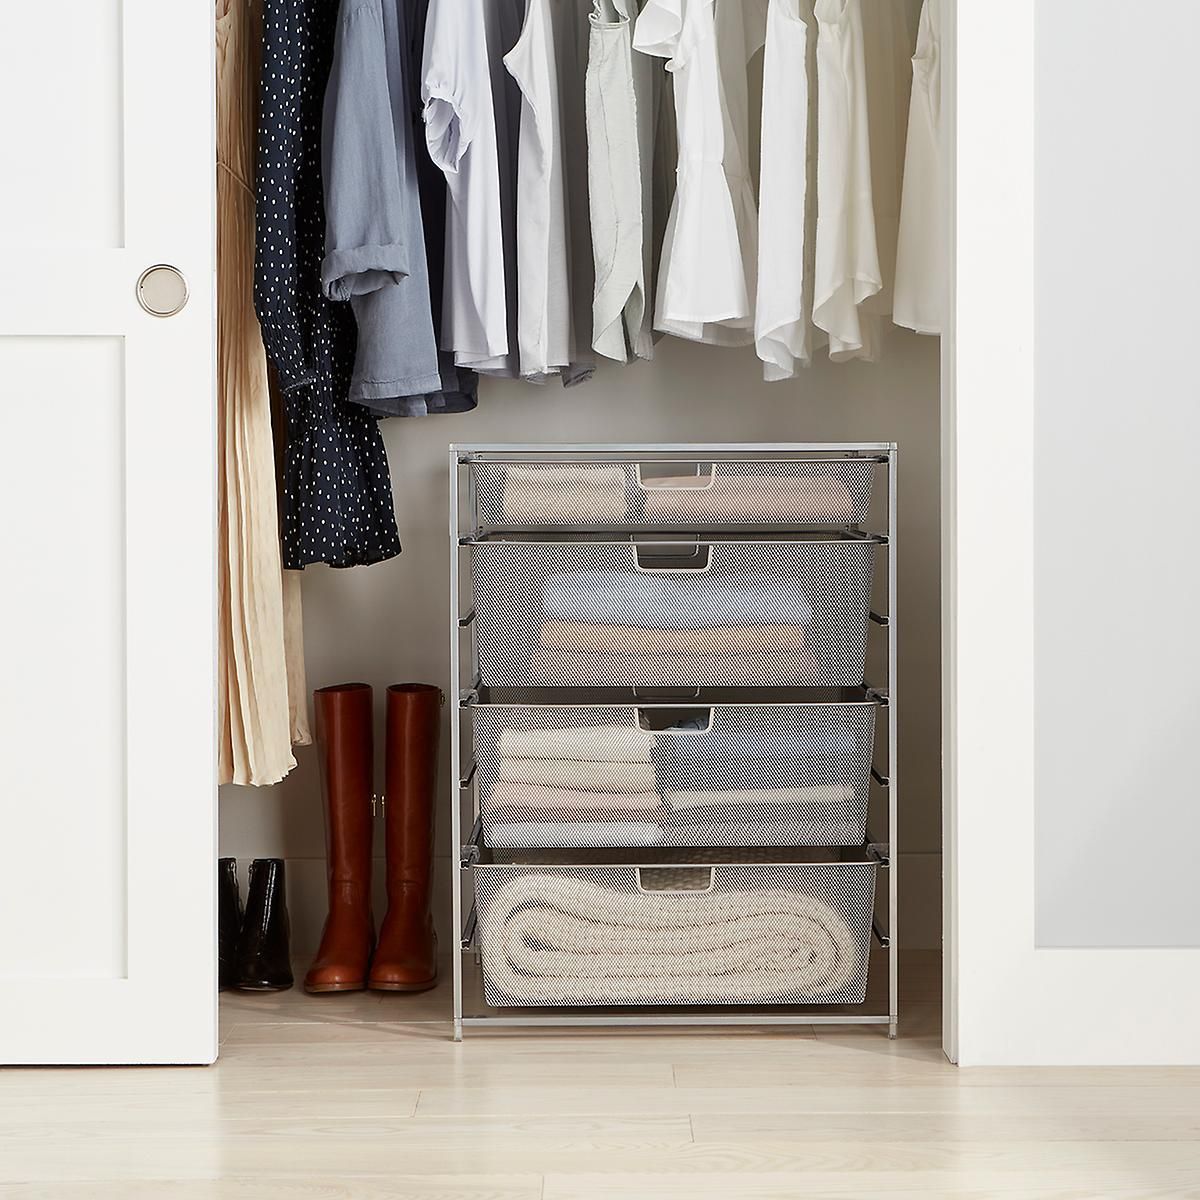 35 Best Closet Organization Ideas To Maximize Space Throughout Wardrobes With Shelf Portable Closet (View 9 of 15)